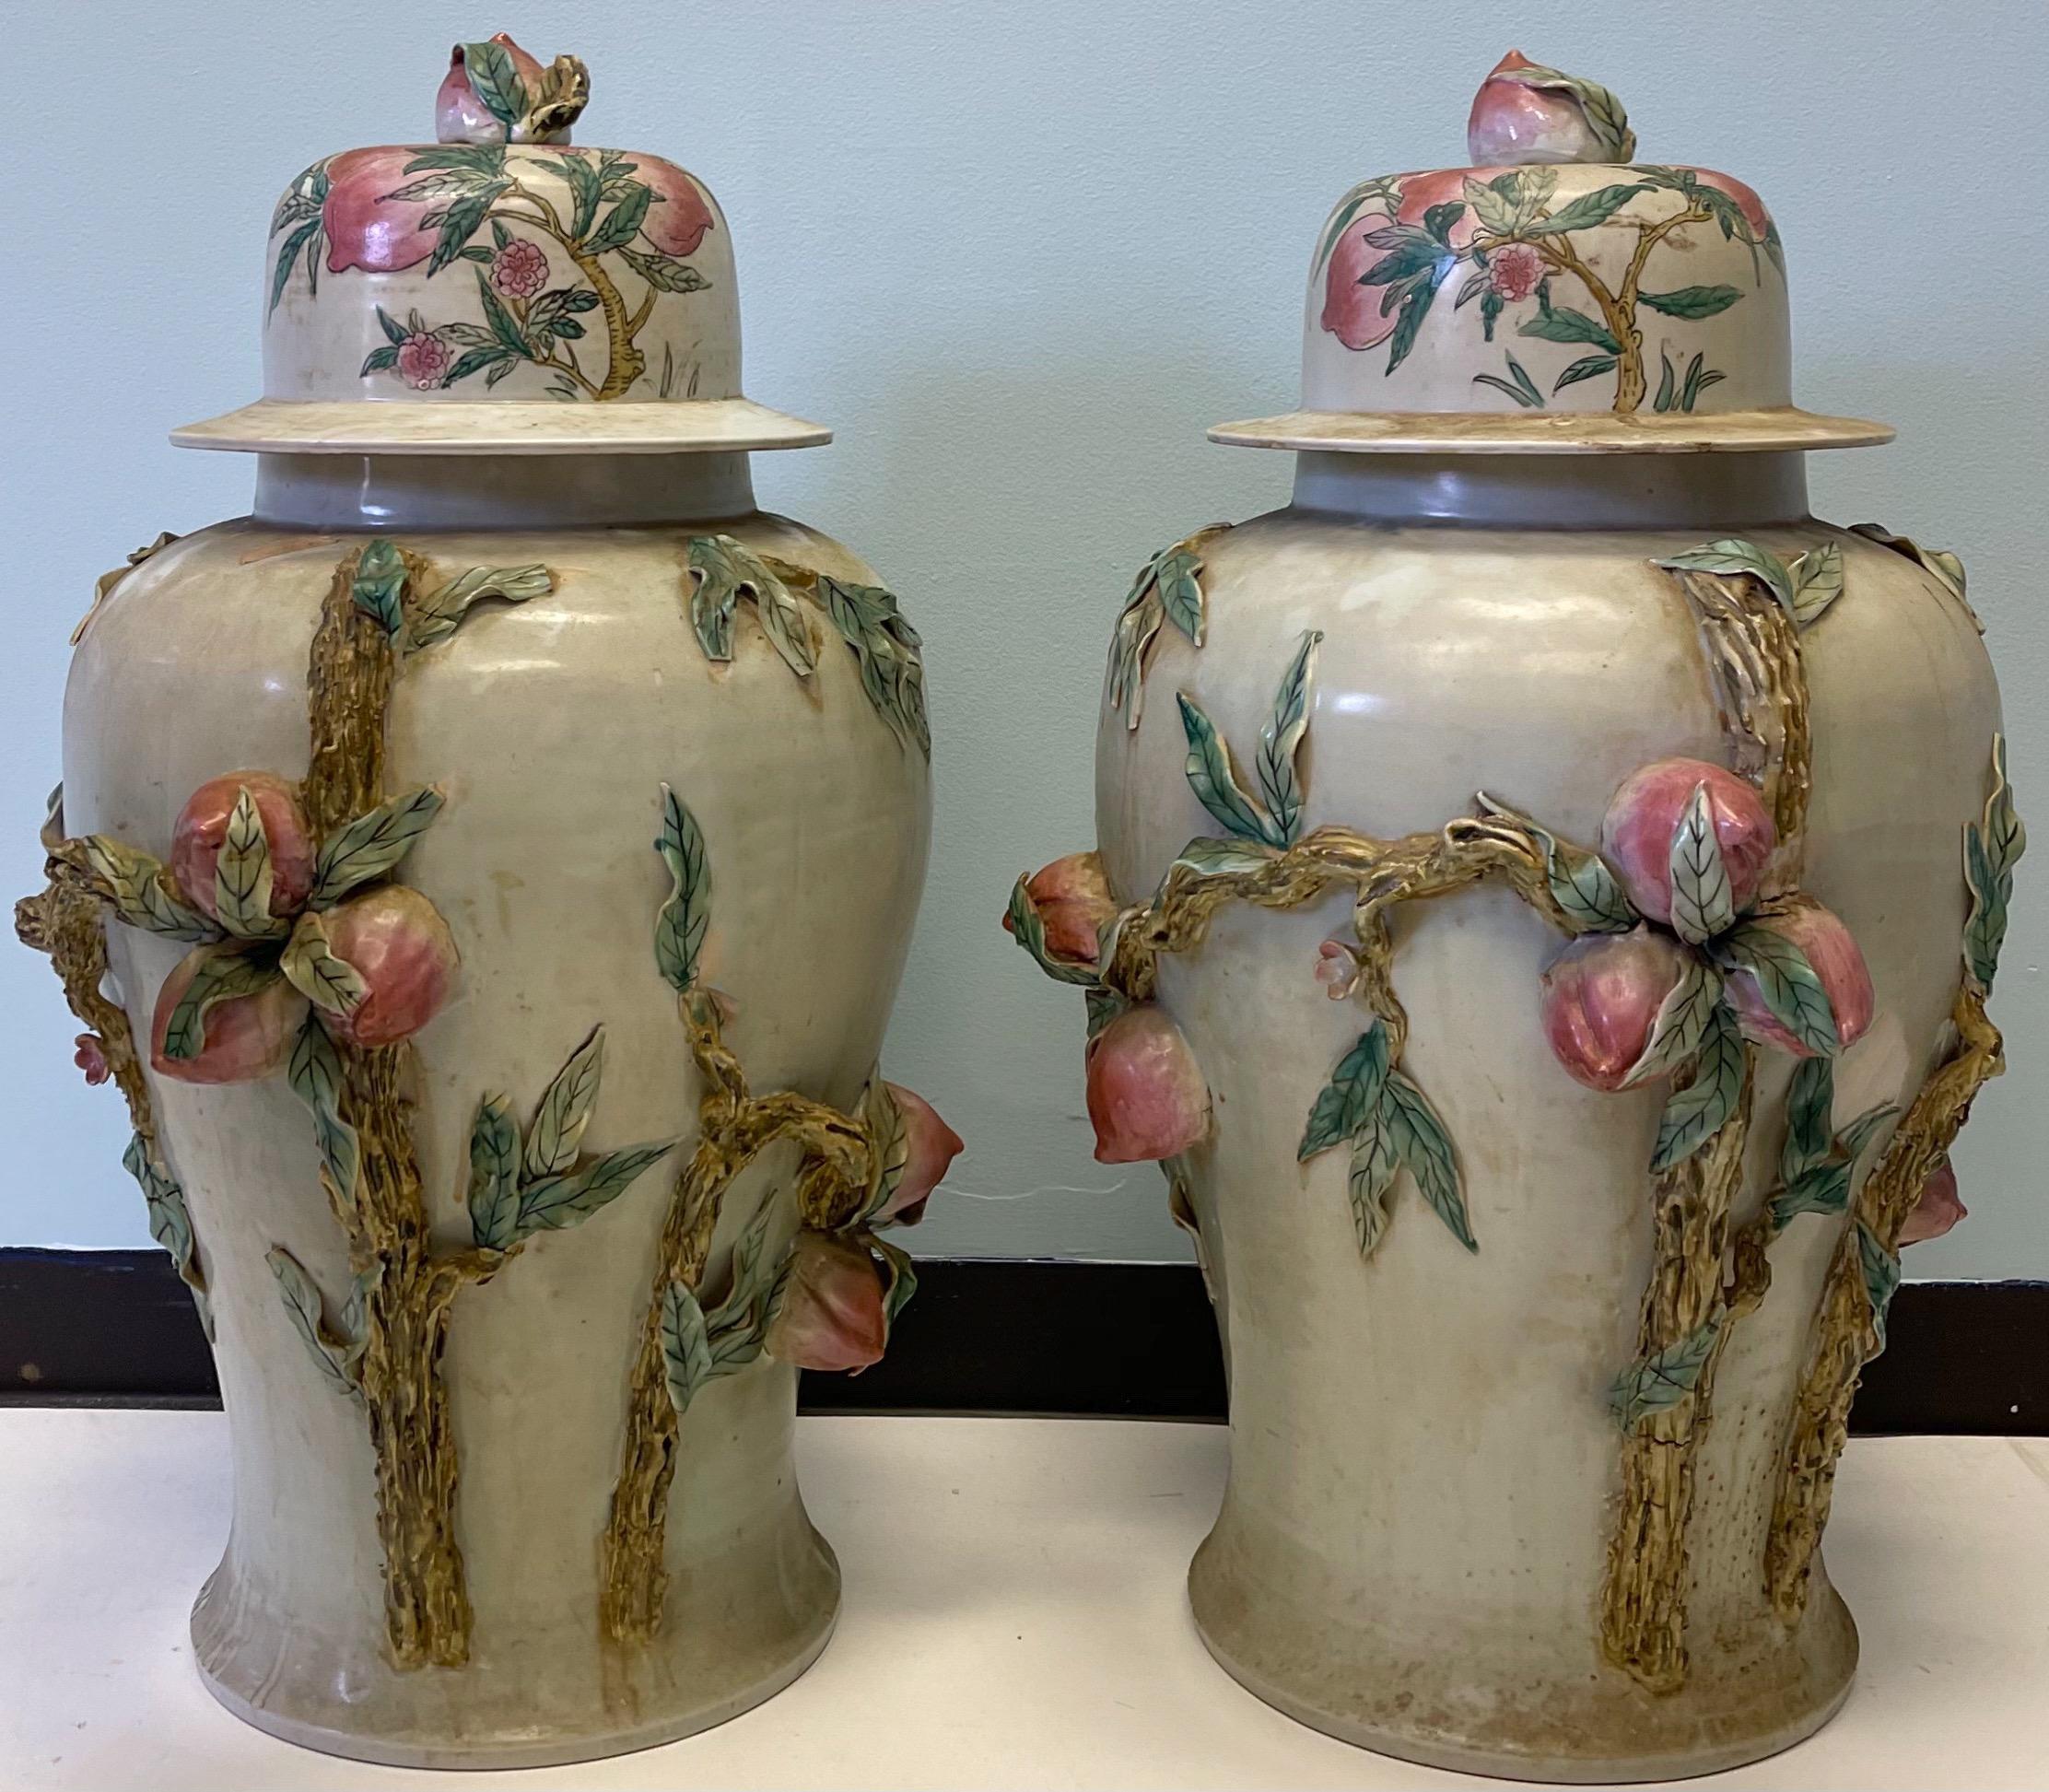 Ceramic Monumental Chinese Ginger Jars with Fruit and Faux Bois Foliate, Pair